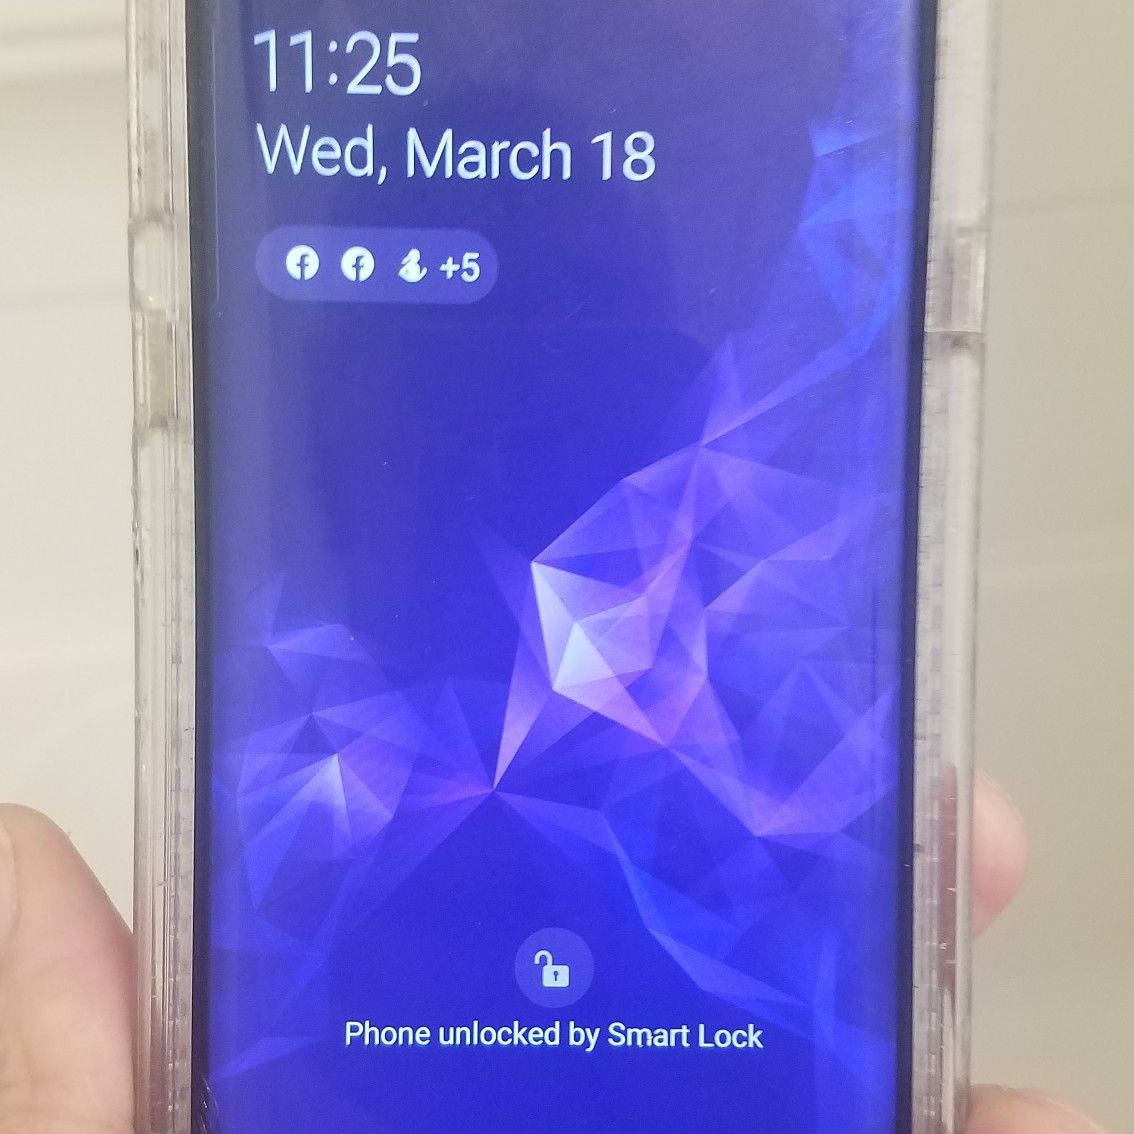 Samsung Galaxy S9 Android phone good condition has A lil crack in left corner askin $300 lowest i take $280 im in philly no shipping im hands on